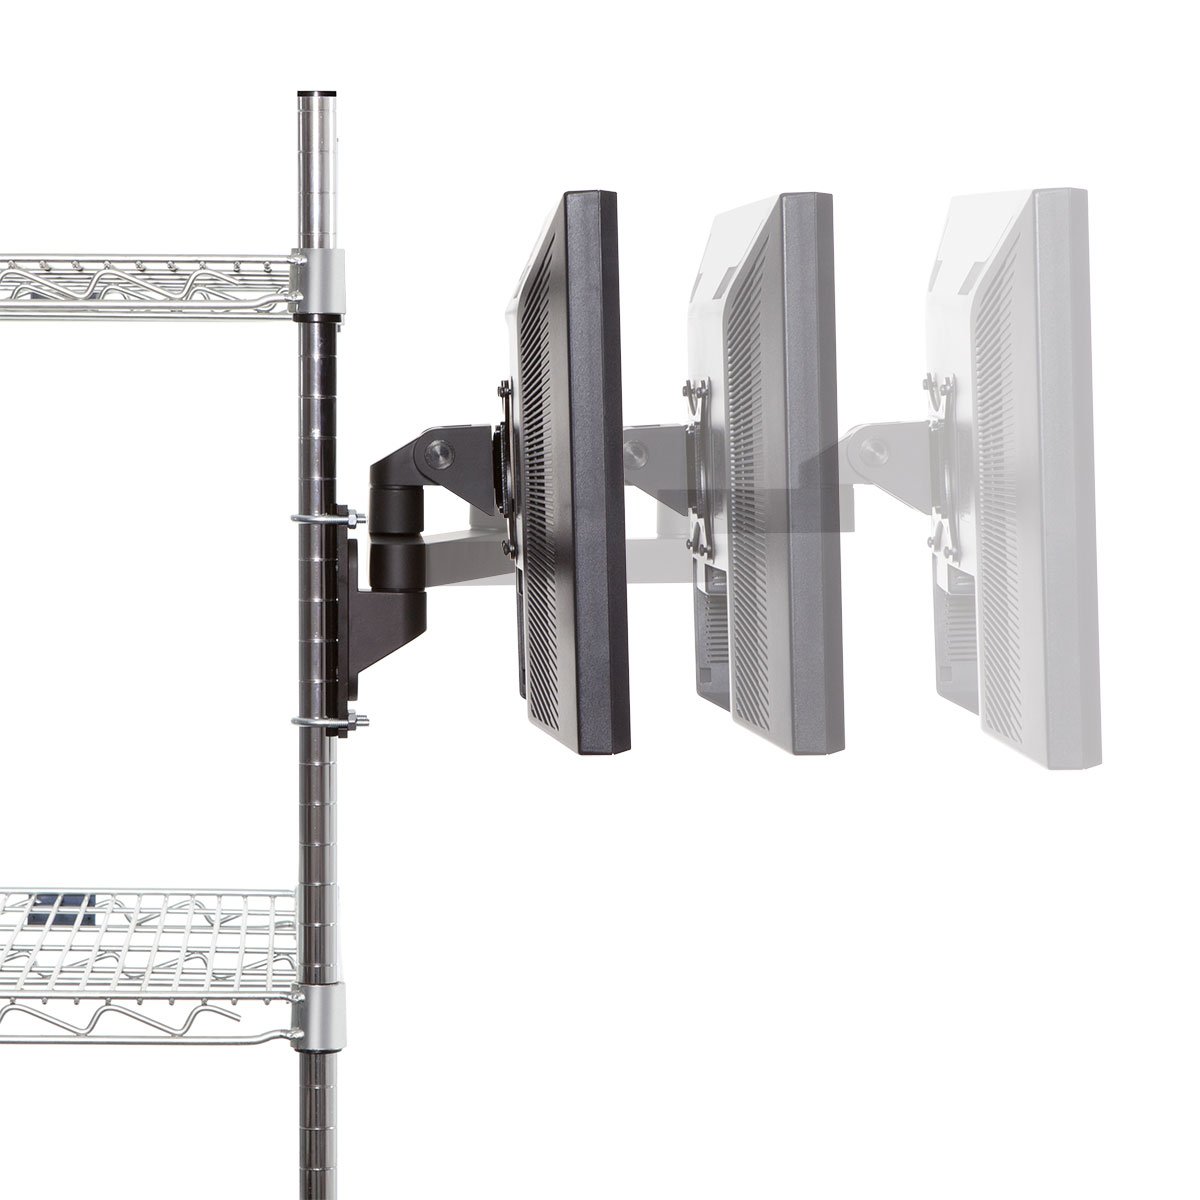 Increase monitor reach with extension arms; arms can be folded upon themselves when not in use